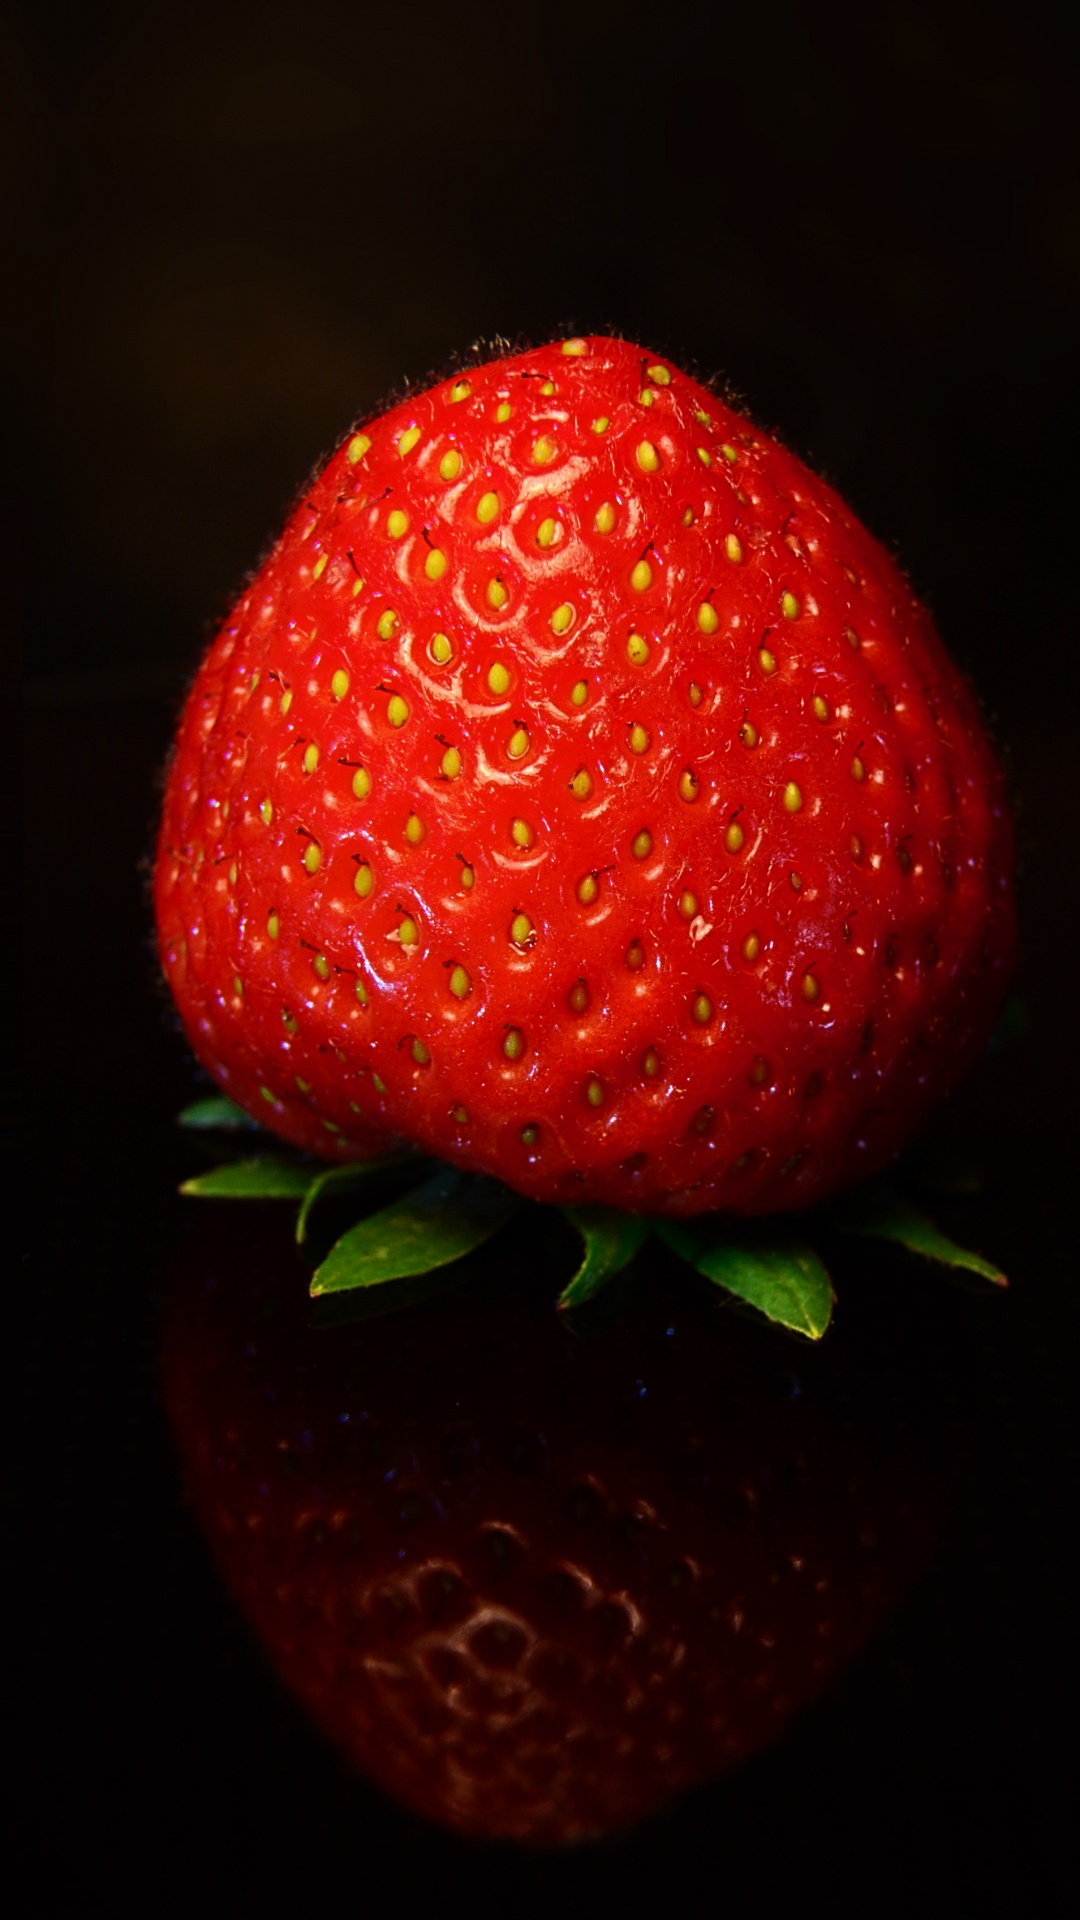 Red Strawberry Fruit in Close up Photography. Wallpaper in 1080x1920 Resolution